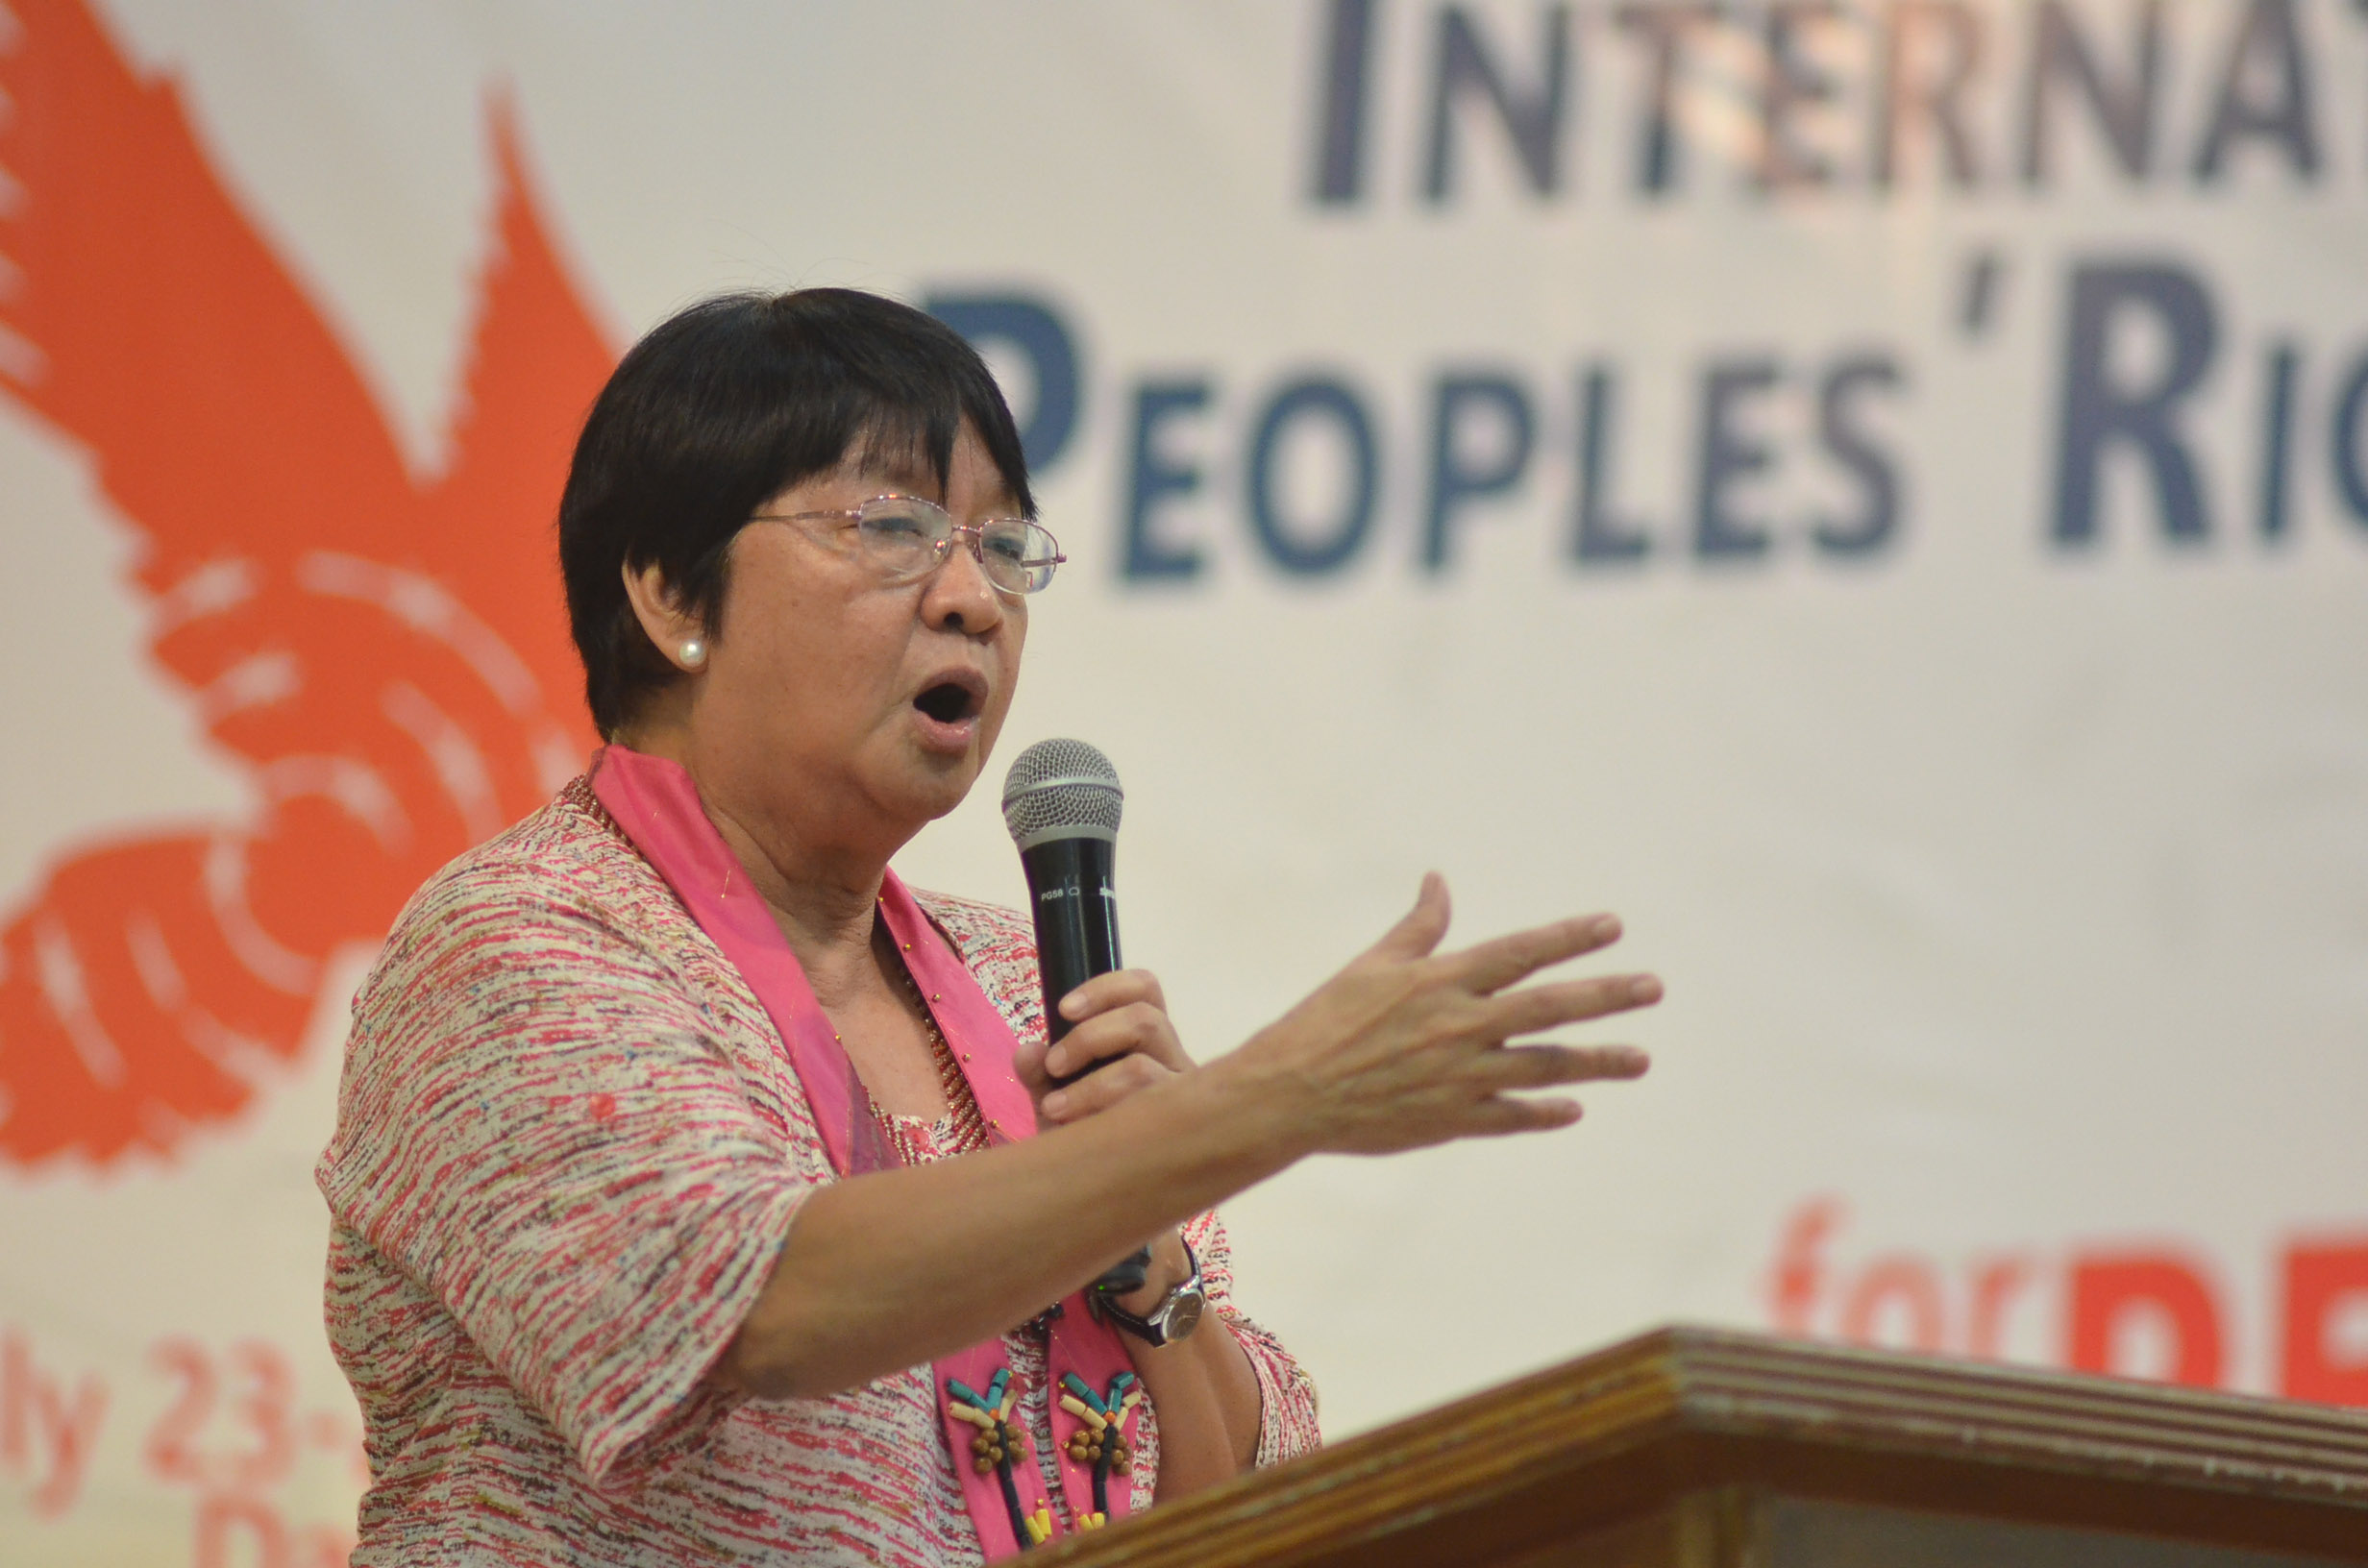 DSWD SECRETARY. Social Welfare and Development Secretary Judy Taguiwalo, speaks during the first day of the International Conference for People's Rights in the Philippines held at the Brokenshire Convention Center in Davao City on Saturday, July 23. (Medel V. Hernani/davaotoday.com)